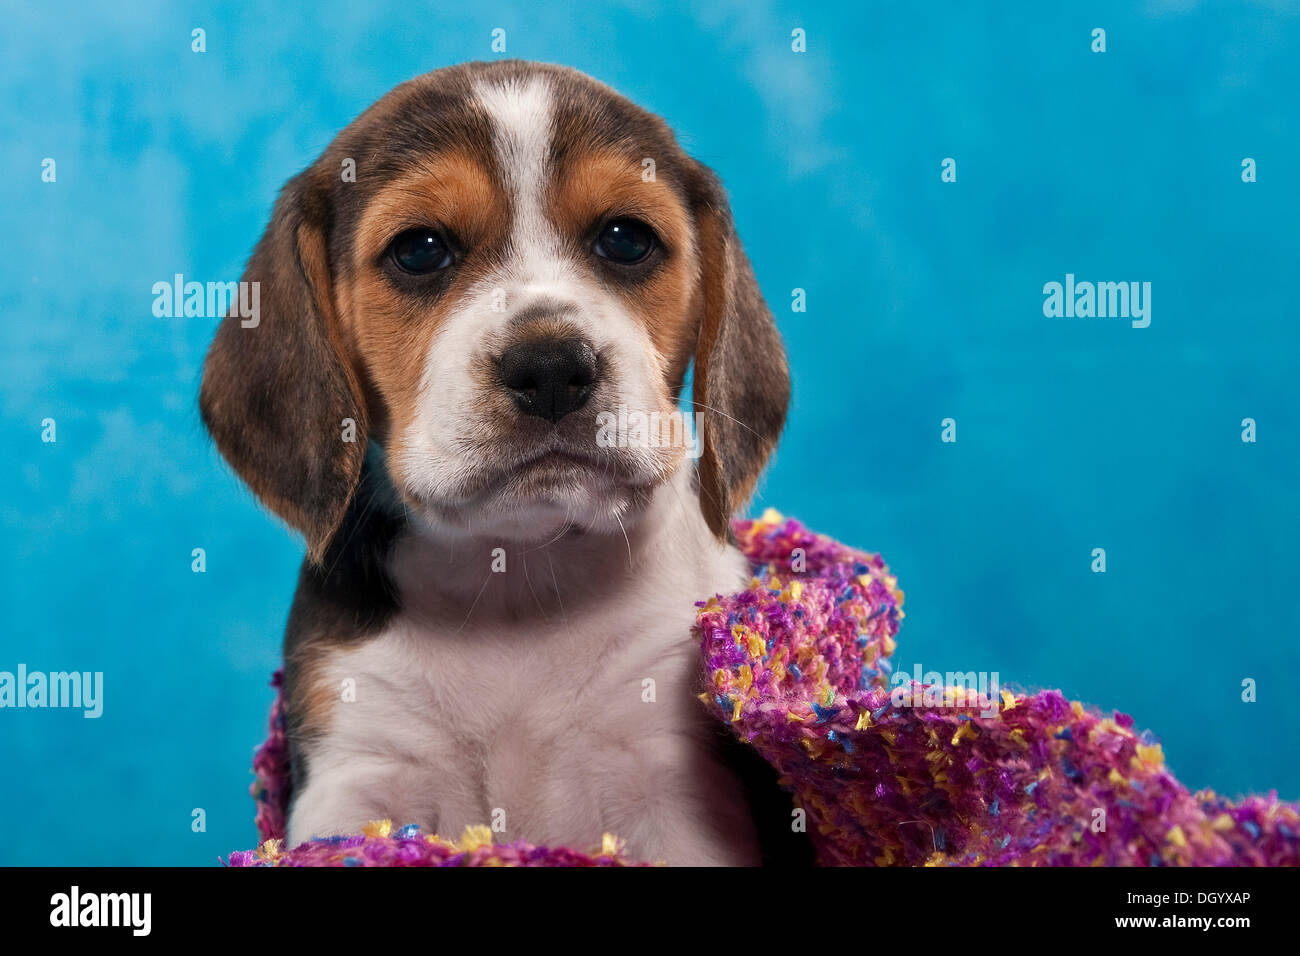 Beagle puppy, portrait, with a blanket Stock Photo